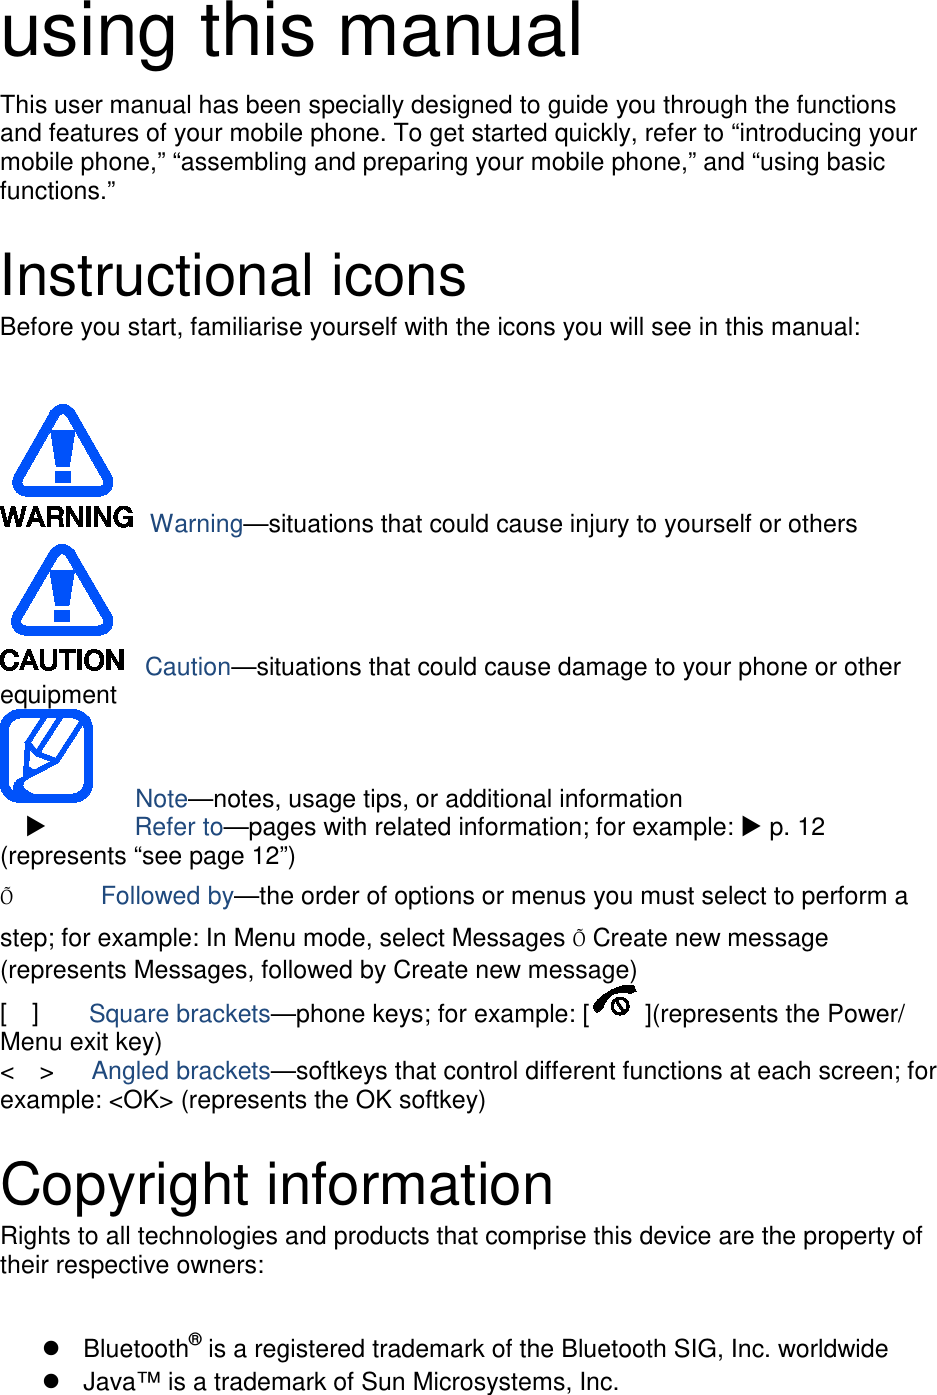 using this manual This user manual has been specially designed to guide you through the functions and features of your mobile phone. To get started quickly, refer to “introducing your mobile phone,” “assembling and preparing your mobile phone,” and “using basic functions.”  Instructional icons Before you start, familiarise yourself with the icons you will see in this manual:     Warning—situations that could cause injury to yourself or others  Caution—situations that could cause damage to your phone or other equipment    Note—notes, usage tips, or additional information          Refer to—pages with related information; for example:  p. 12 (represents “see page 12”) Õ       Followed by—the order of options or menus you must select to perform a step; for example: In Menu mode, select Messages Õ Create new message (represents Messages, followed by Create new message) [  ]    Square brackets—phone keys; for example: [ ](represents the Power/ Menu exit key) &lt;  &gt;   Angled brackets—softkeys that control different functions at each screen; for example: &lt;OK&gt; (represents the OK softkey)  Copyright information Rights to all technologies and products that comprise this device are the property of their respective owners:   Bluetooth® Java™ is a trademark of Sun Microsystems, Inc.  is a registered trademark of the Bluetooth SIG, Inc. worldwide 